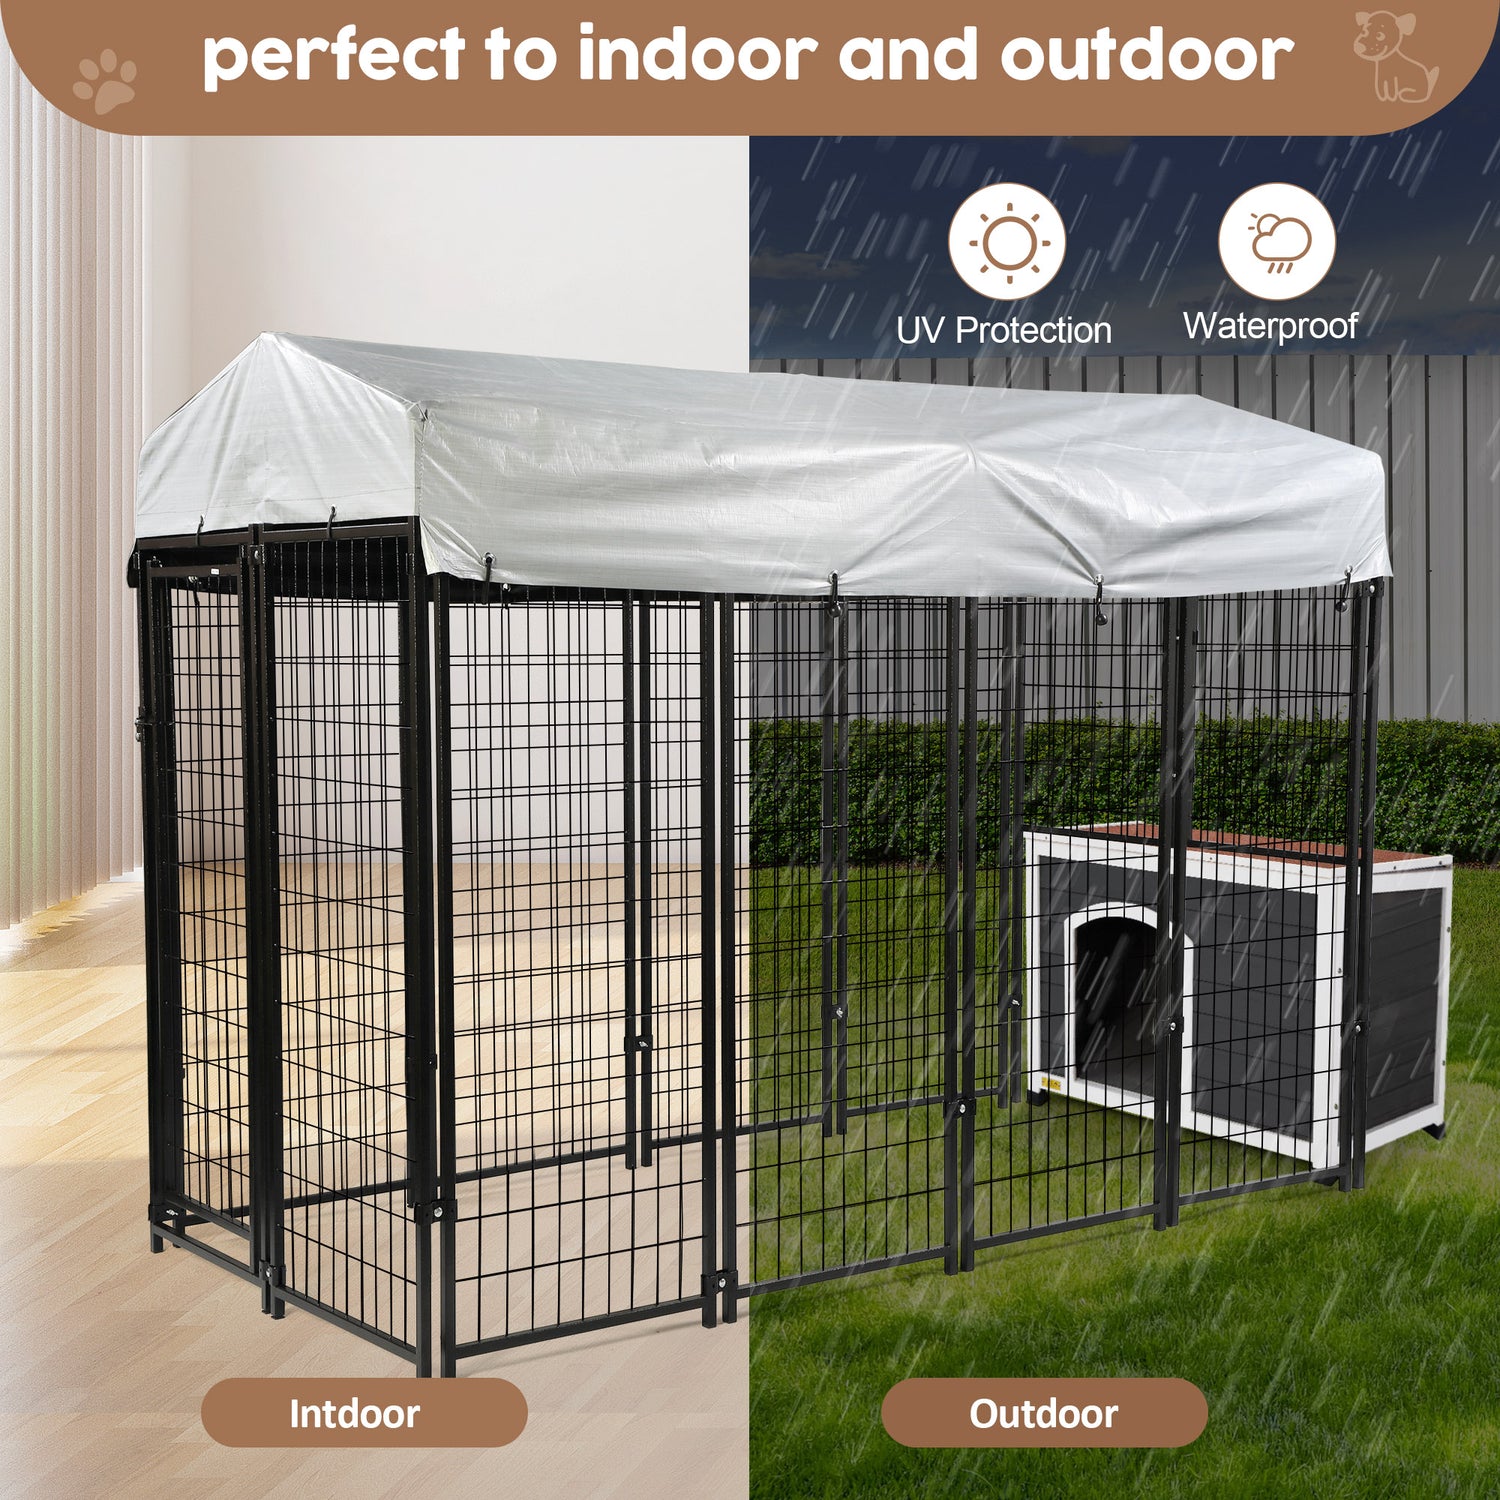 Coziwow 7'X 3'X 6' Outdoor Dog Kennel Enclosure with Dog House, Waterproof Cover